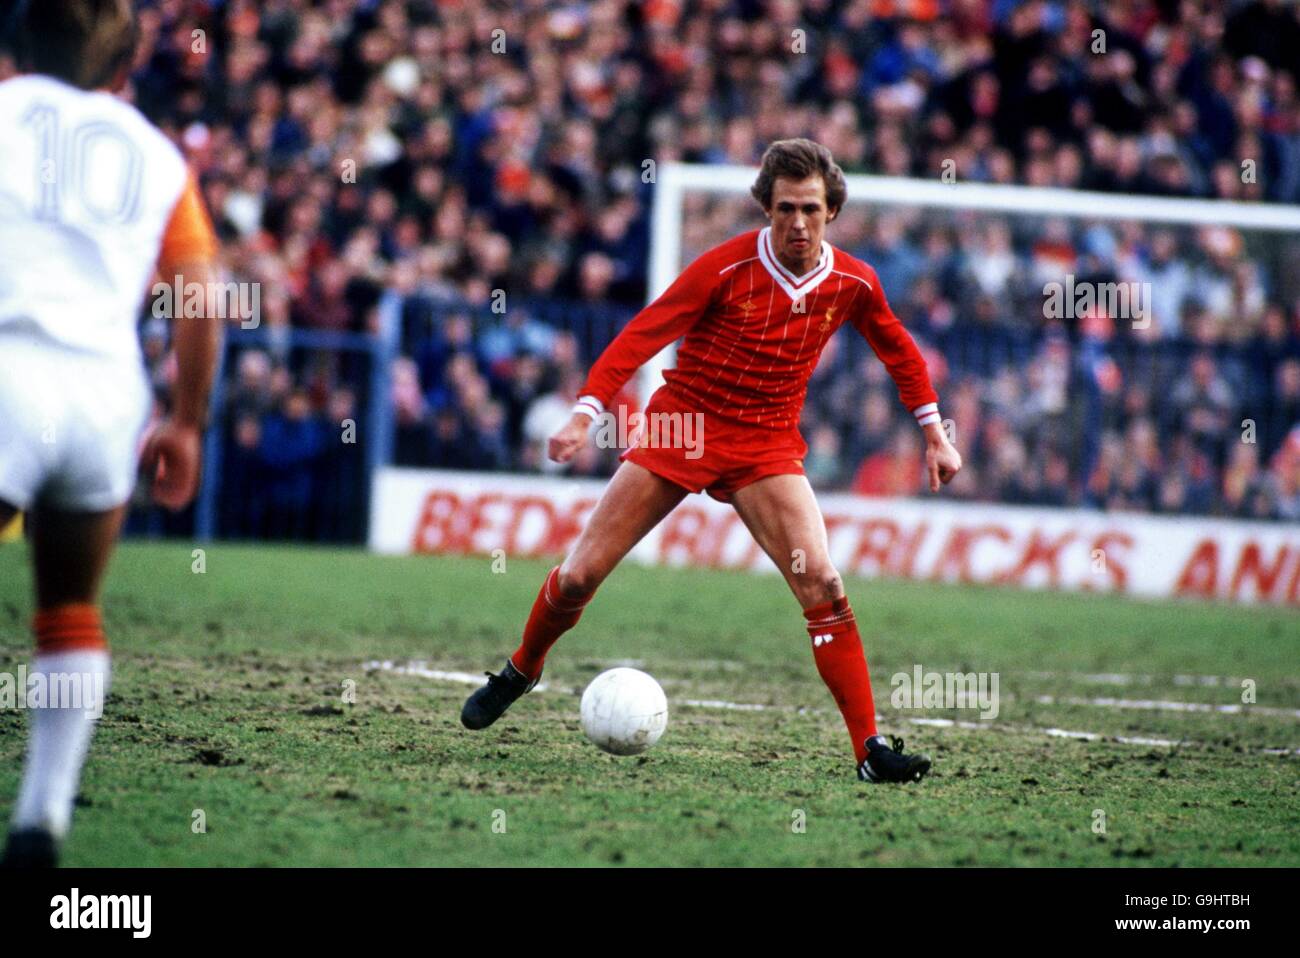 Fußball - Football League Division One - Luton Town gegen Liverpool. Phil Neal, Liverpool Stockfoto